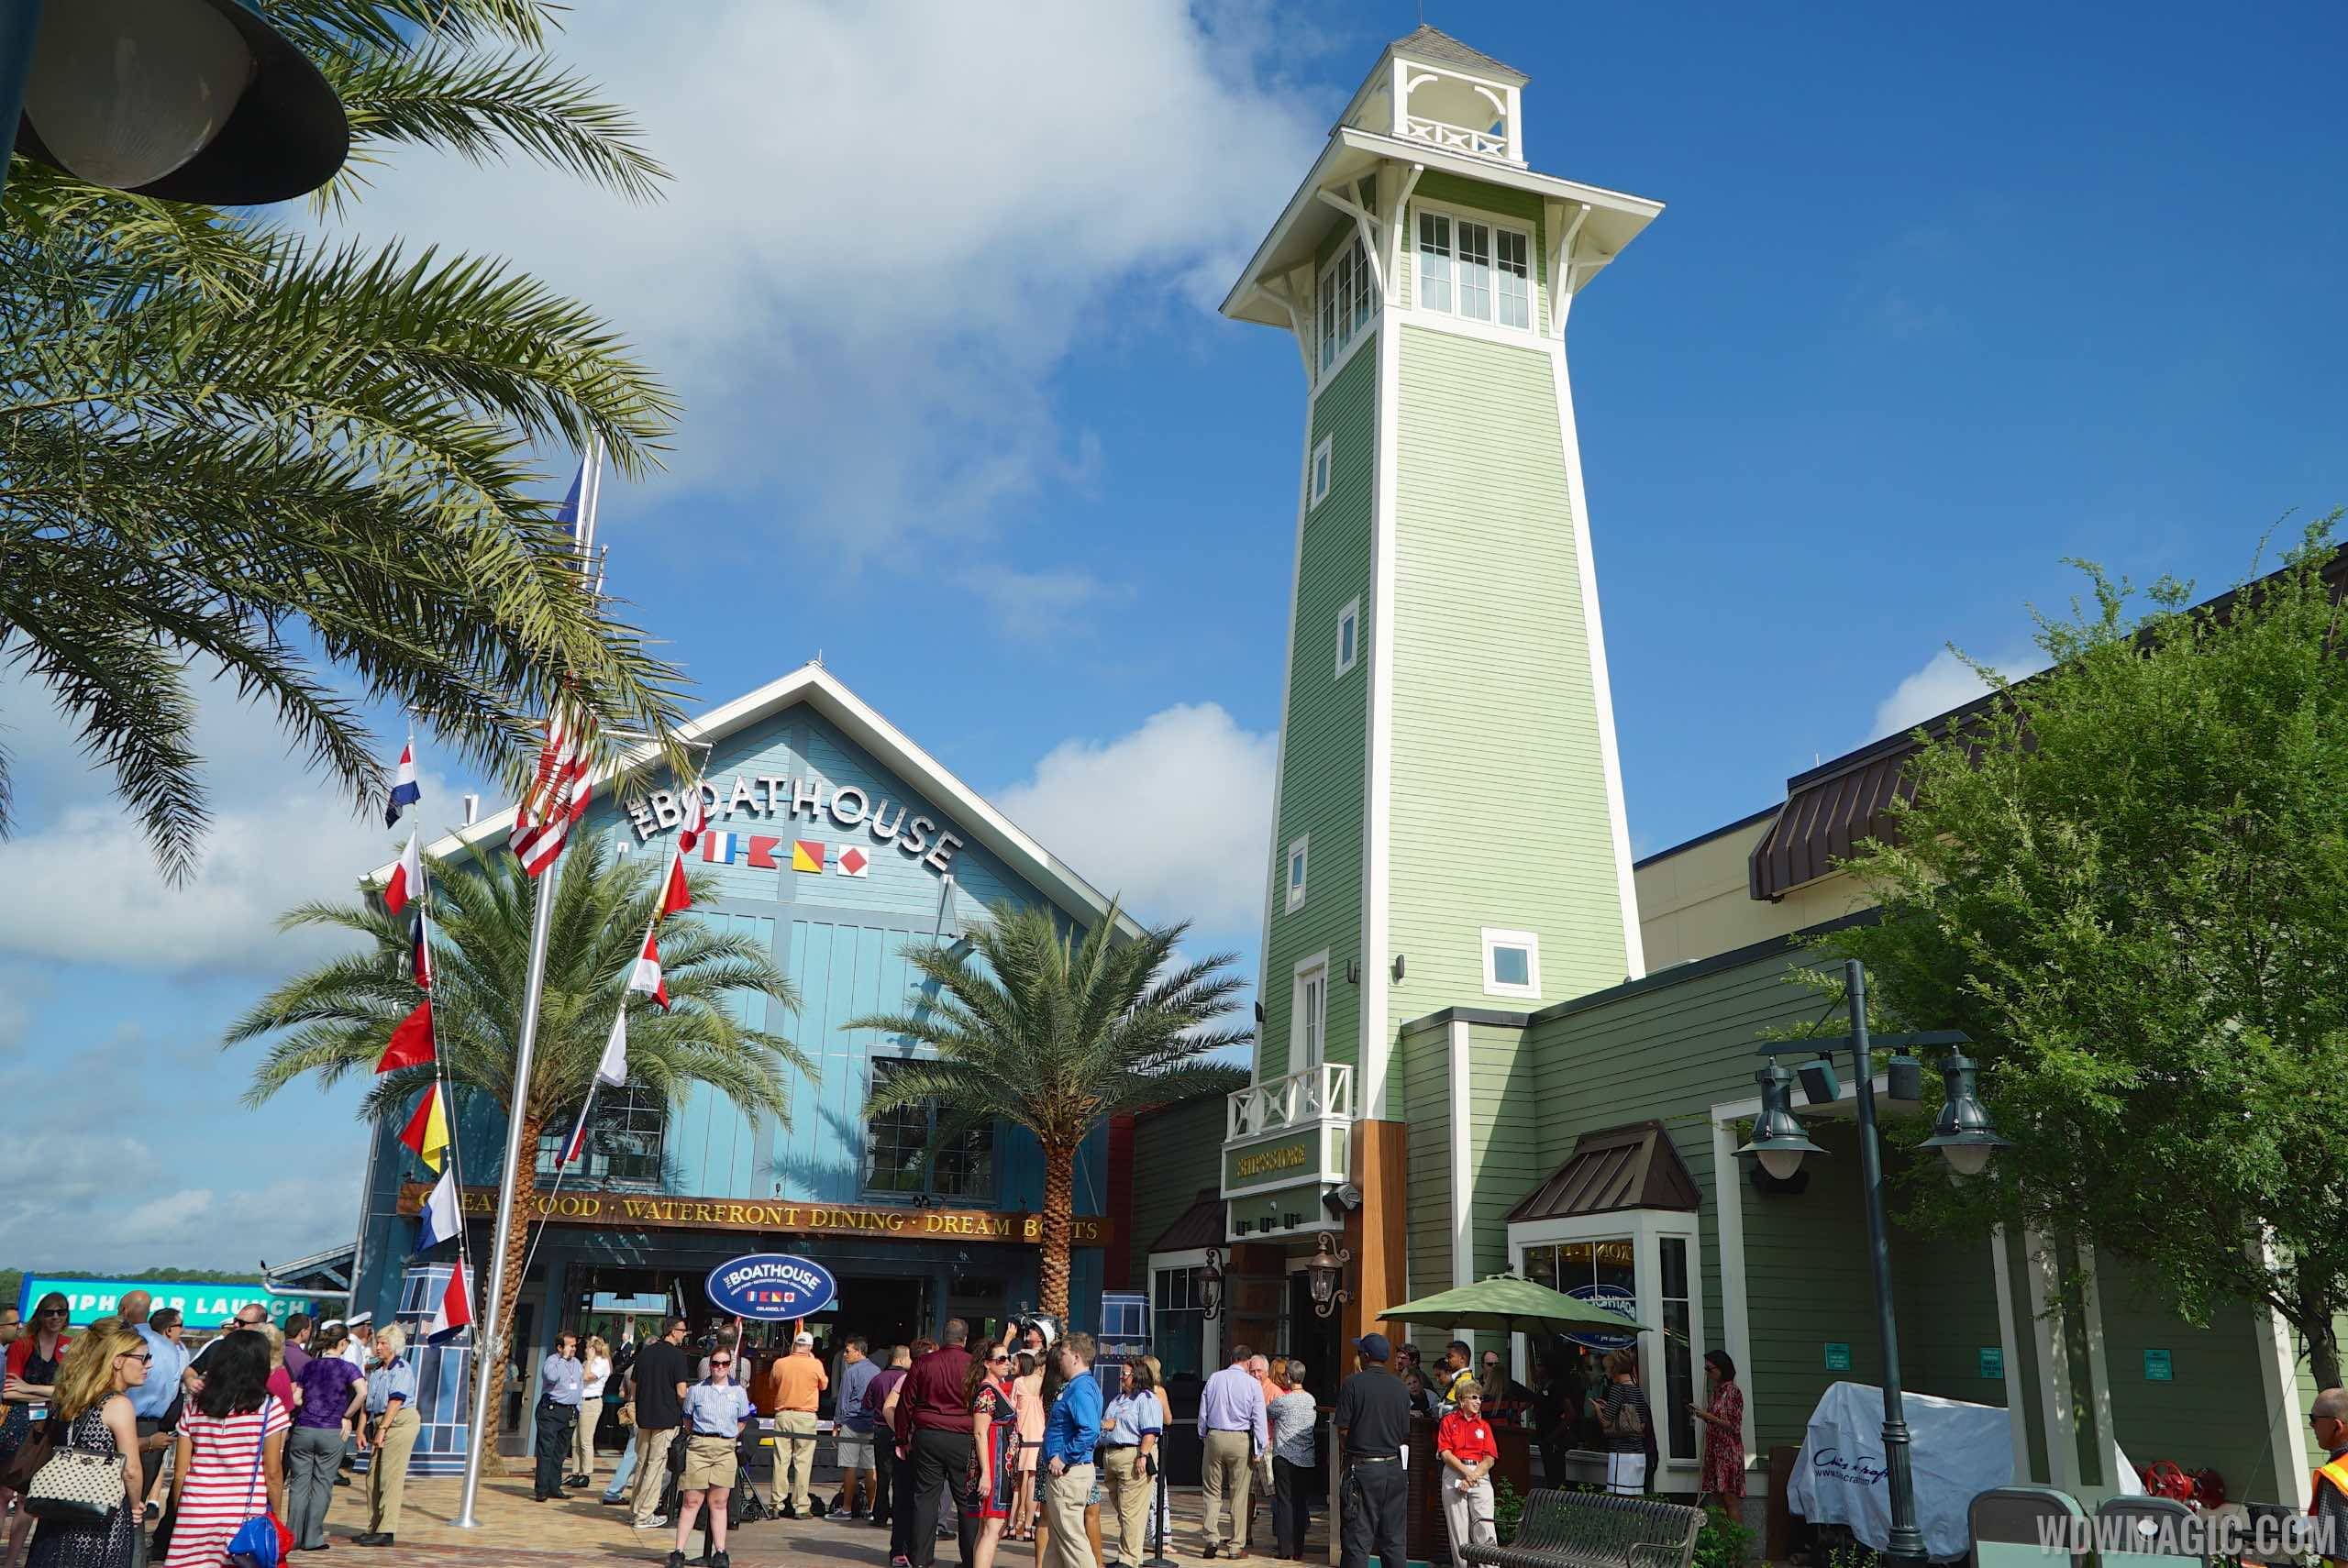 The BOATHOUSE at Disney Springs now offers passholder discounts